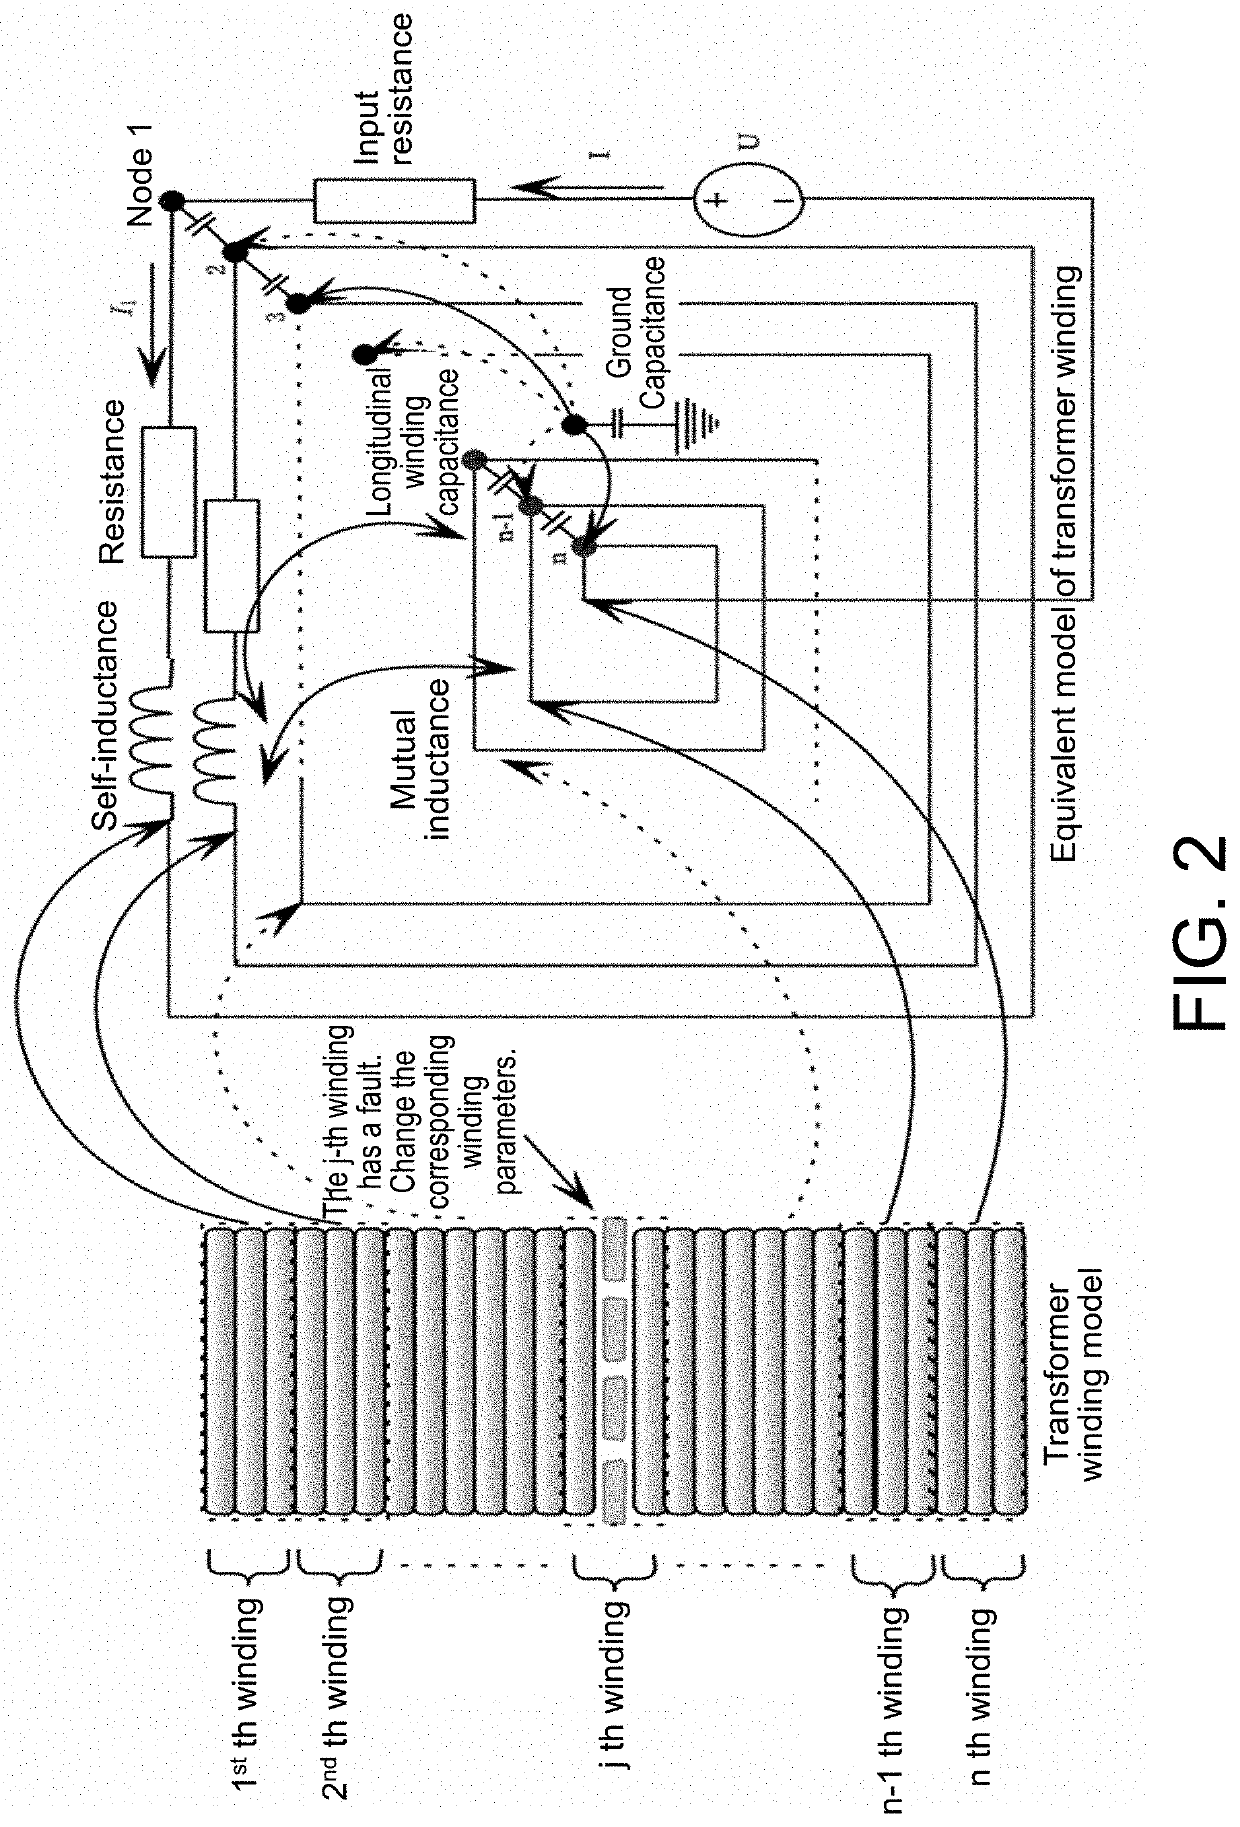 Power transformer winding fault positioning method based on deep convolutional neural network integrated with visual identification